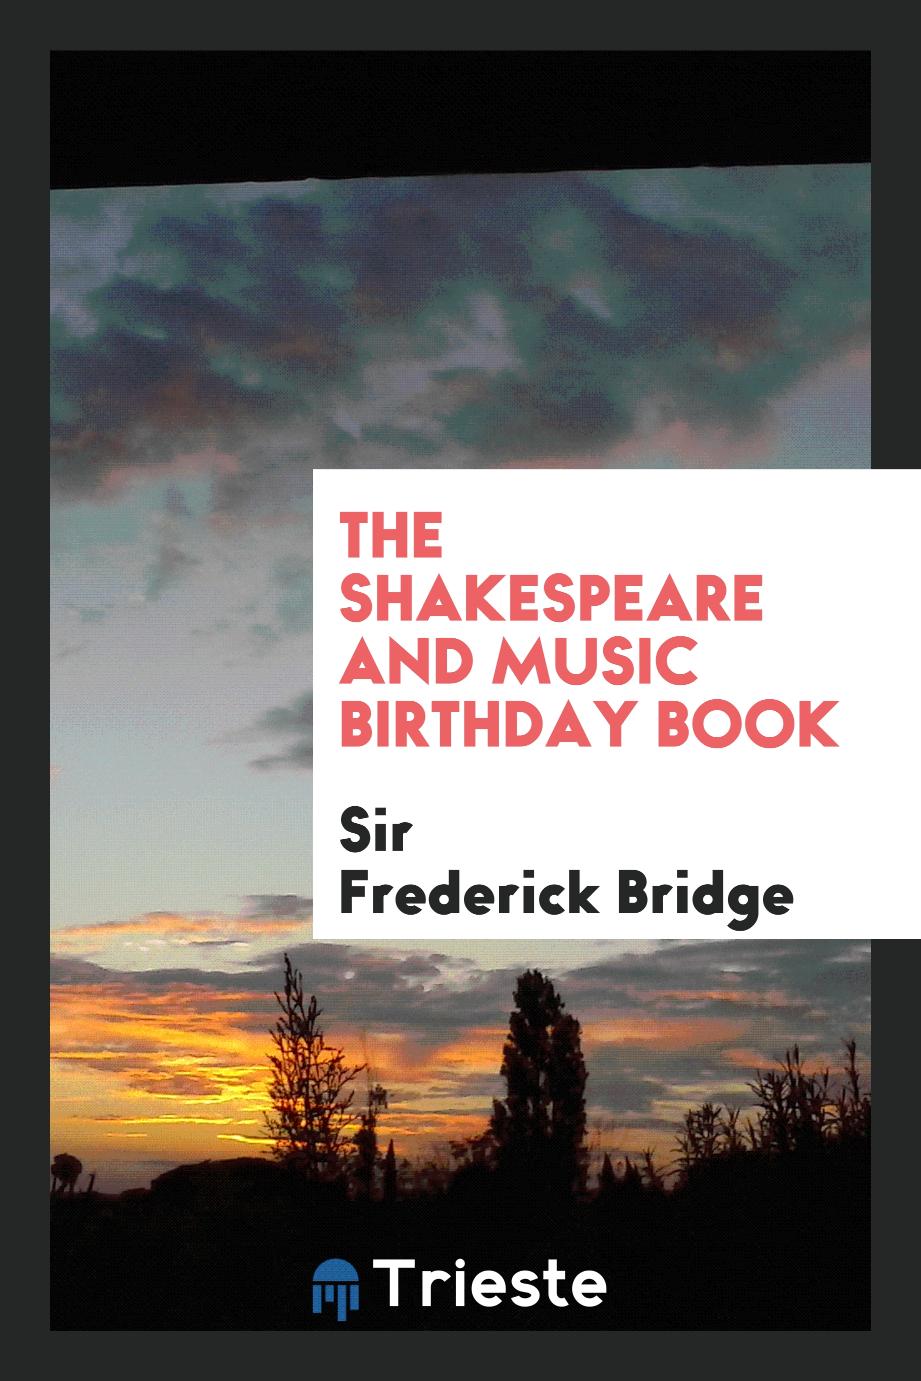 The Shakespeare and music birthday book